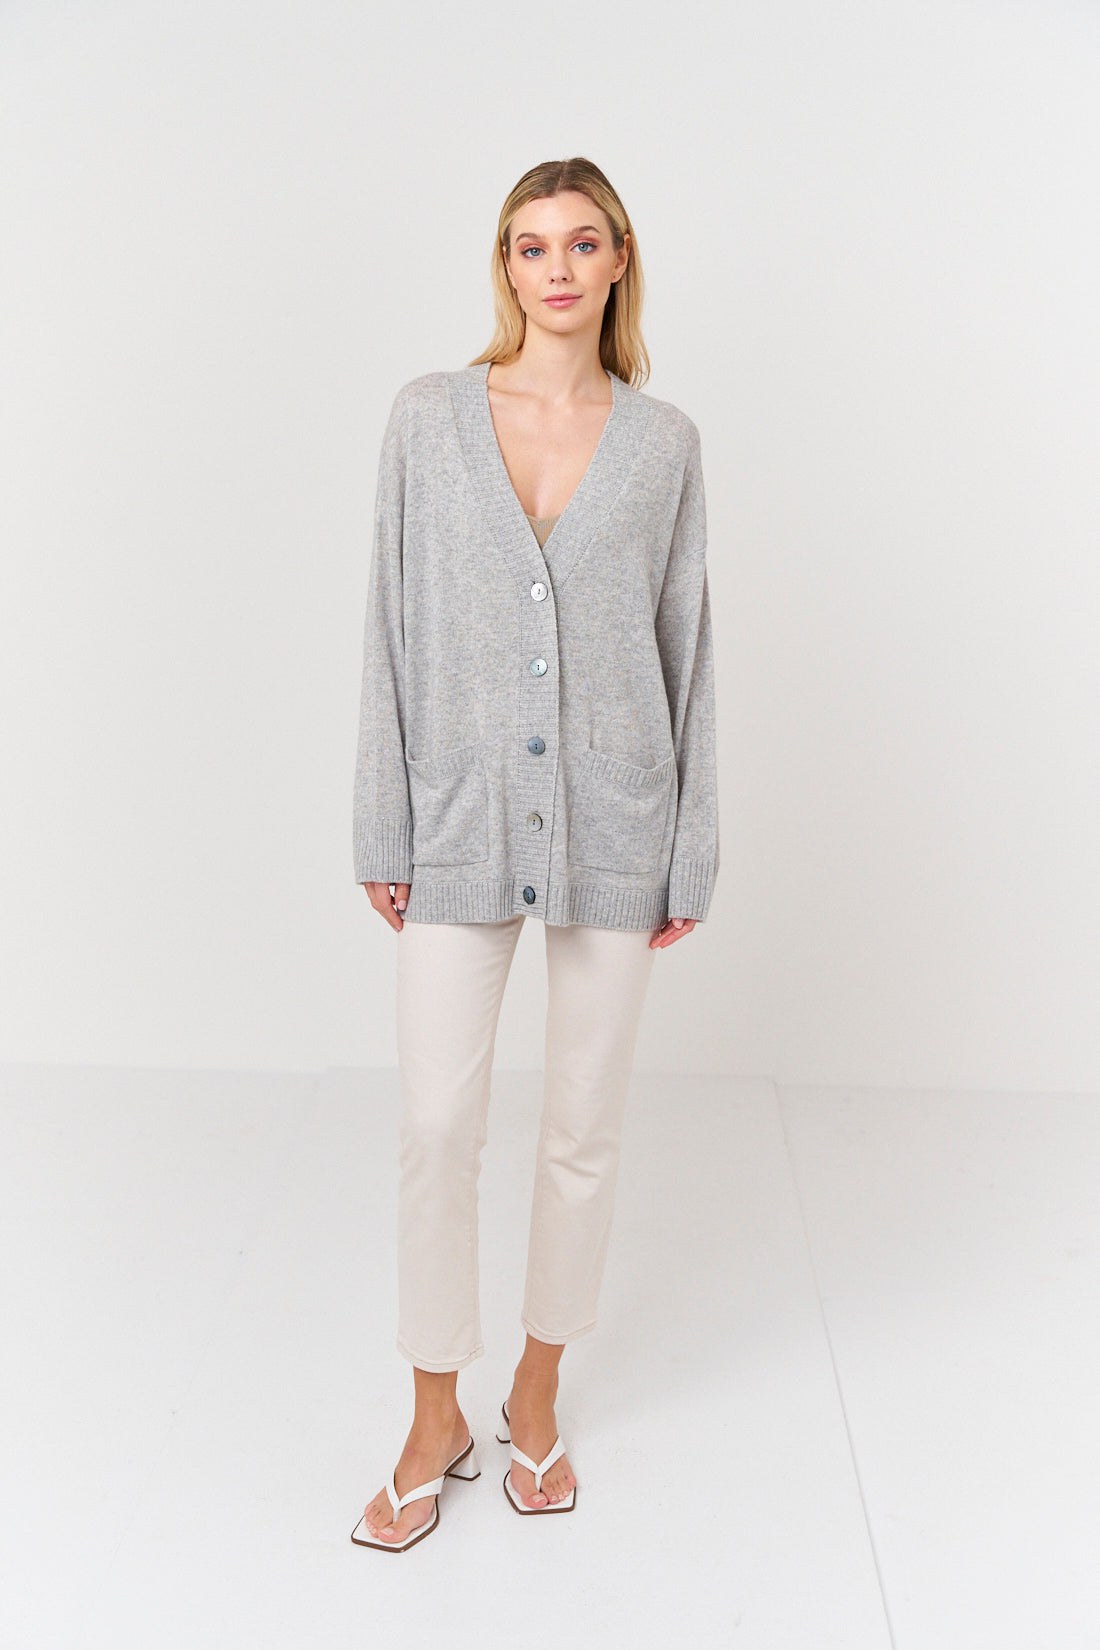 Embroidered Eye Cardigan Super Grey, Sweater by Brodie Cashmere | LIT Boutique